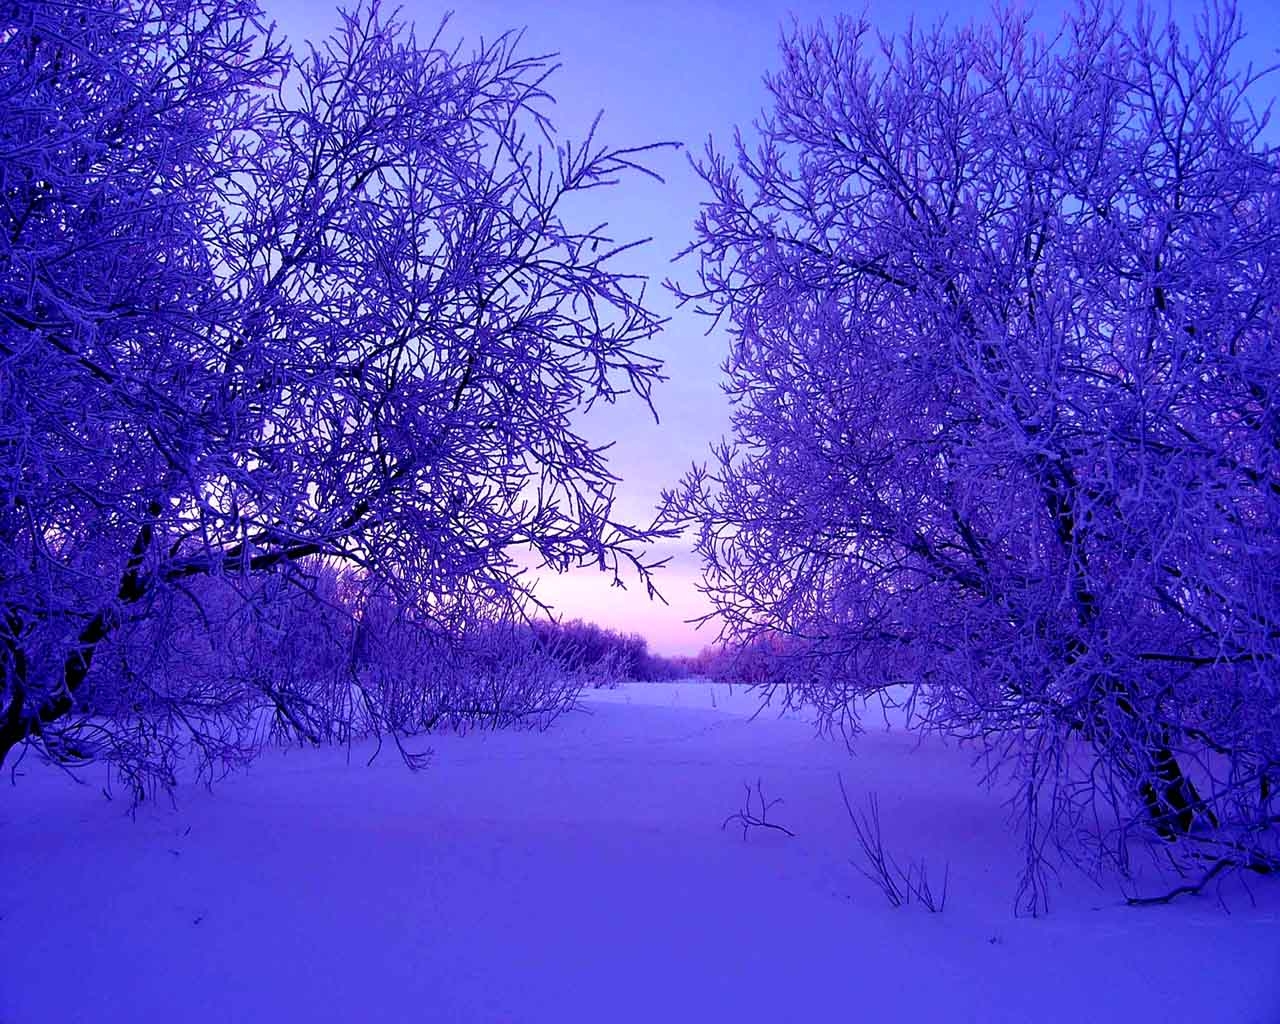 Wallpaper, sunlight, trees, landscape, nature, sky, snow, winter, purple, branch, blue, ice, evening, morning, frost, atmosphere, blossom, spring, Freezing, tree, dawn, daytime, twig, computer wallpaper, ecosystem, phenomenon, snowdrifts 1280x1024